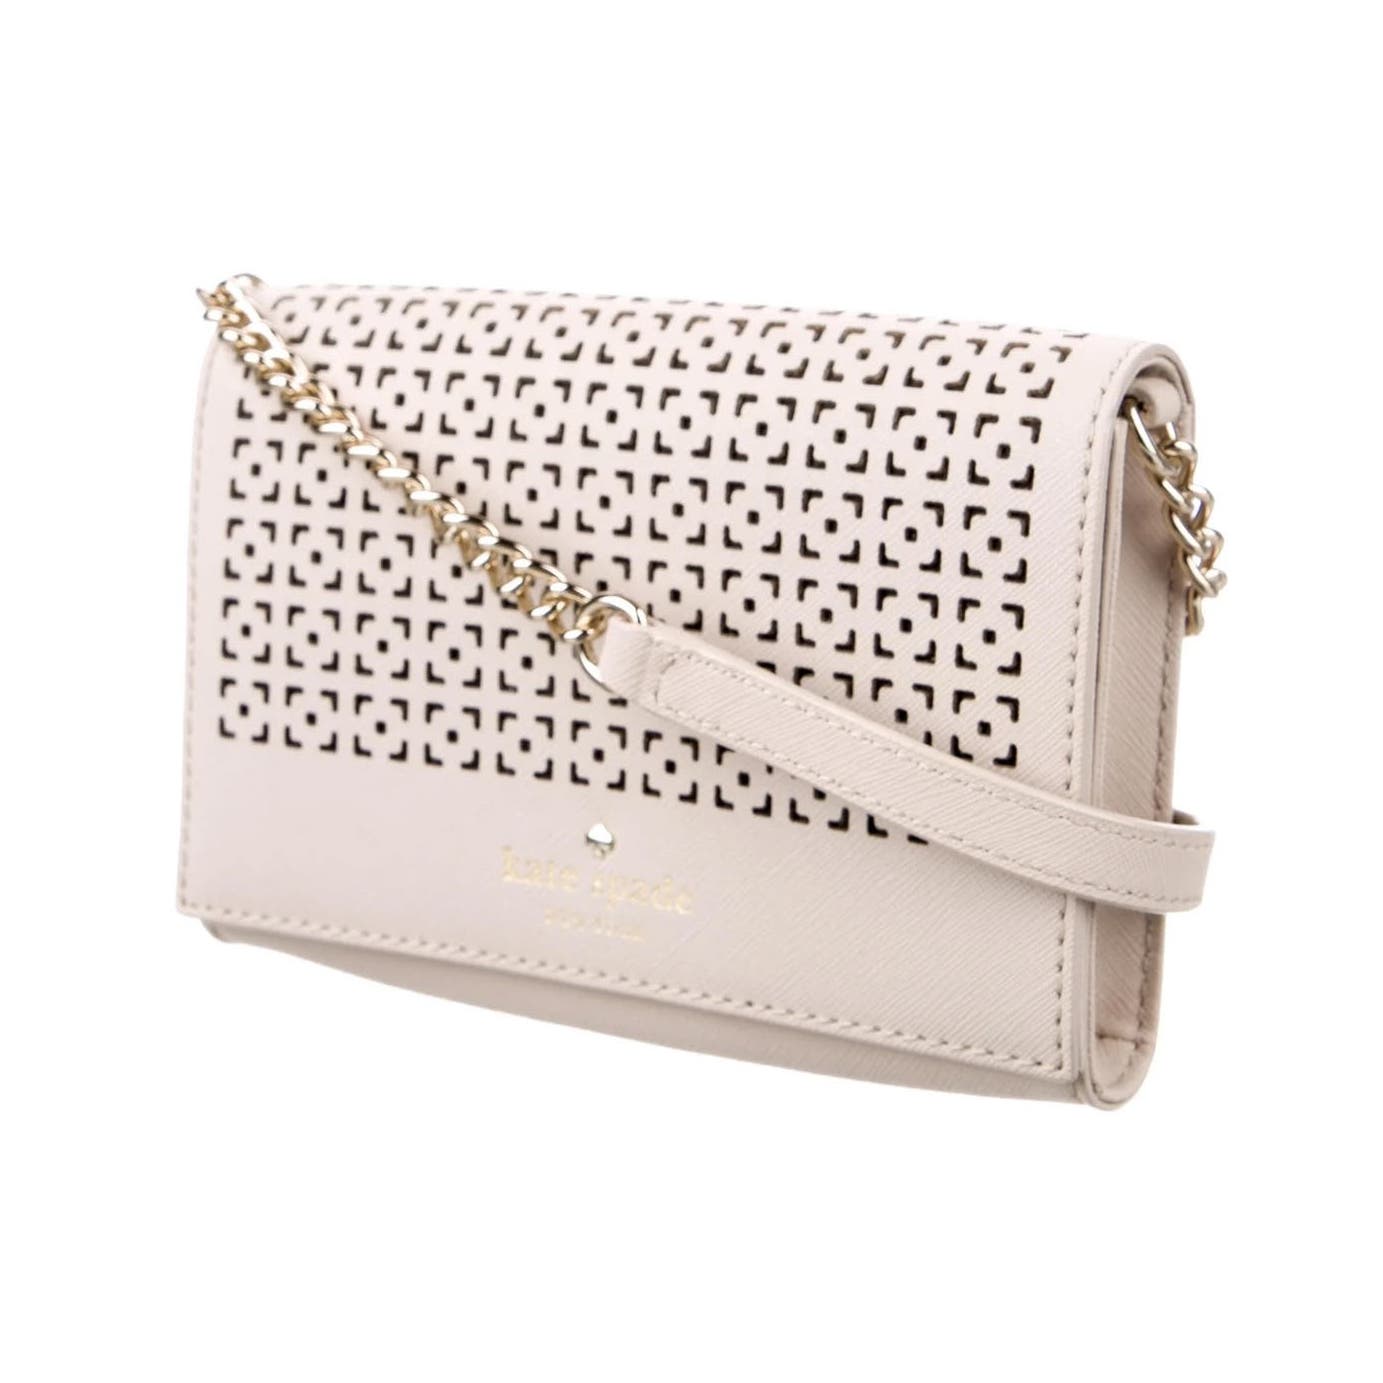 Kate Spade Perforated Leather Crossbody Purse White